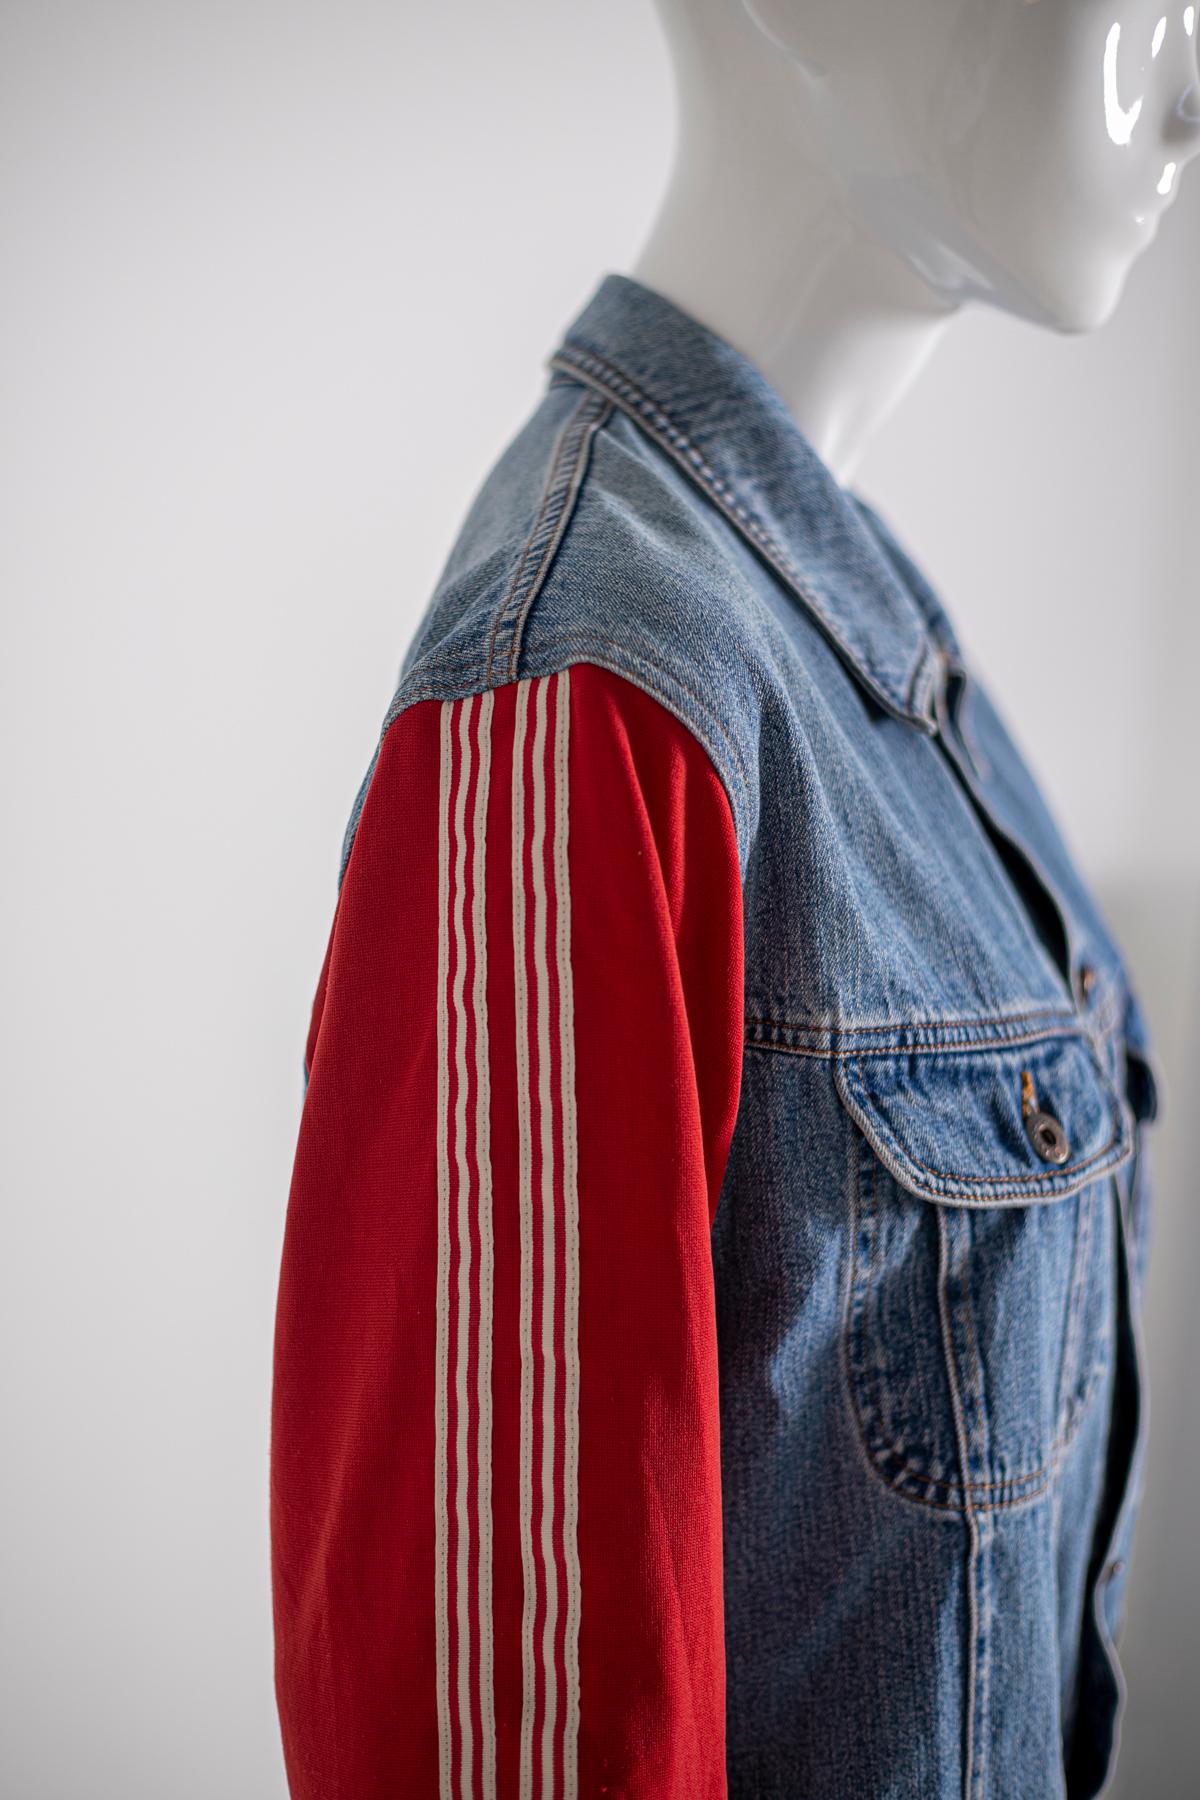 Dolce & Gabbana Vintage Jeans Jacket, Original Label In Good Condition For Sale In Milano, IT